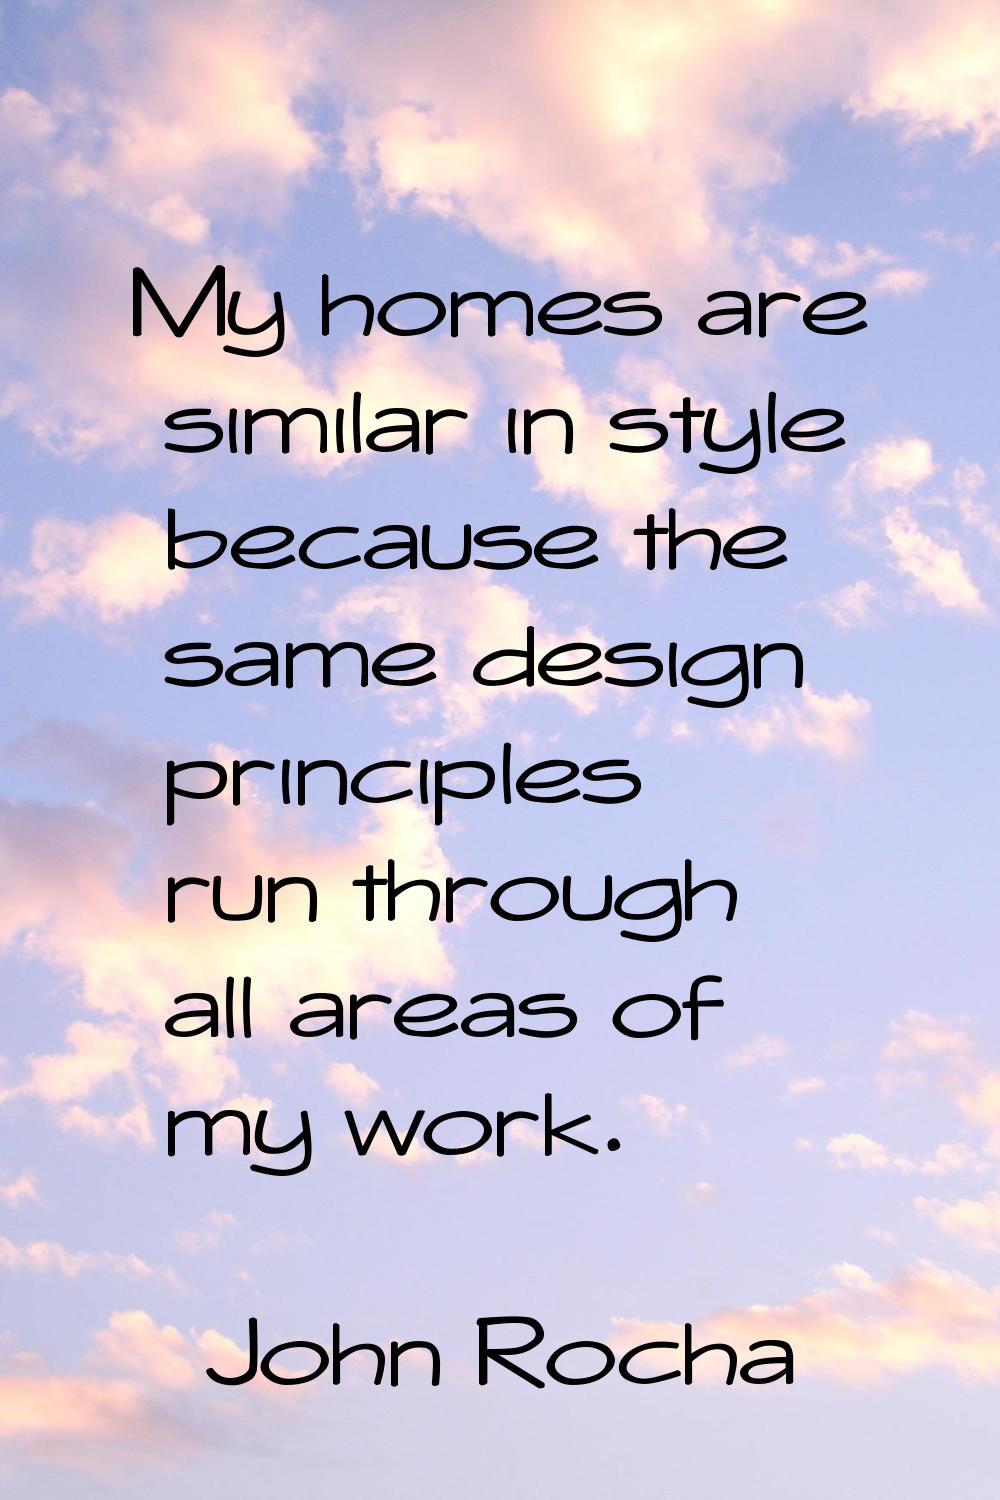 My homes are similar in style because the same design principles run through all areas of my work.